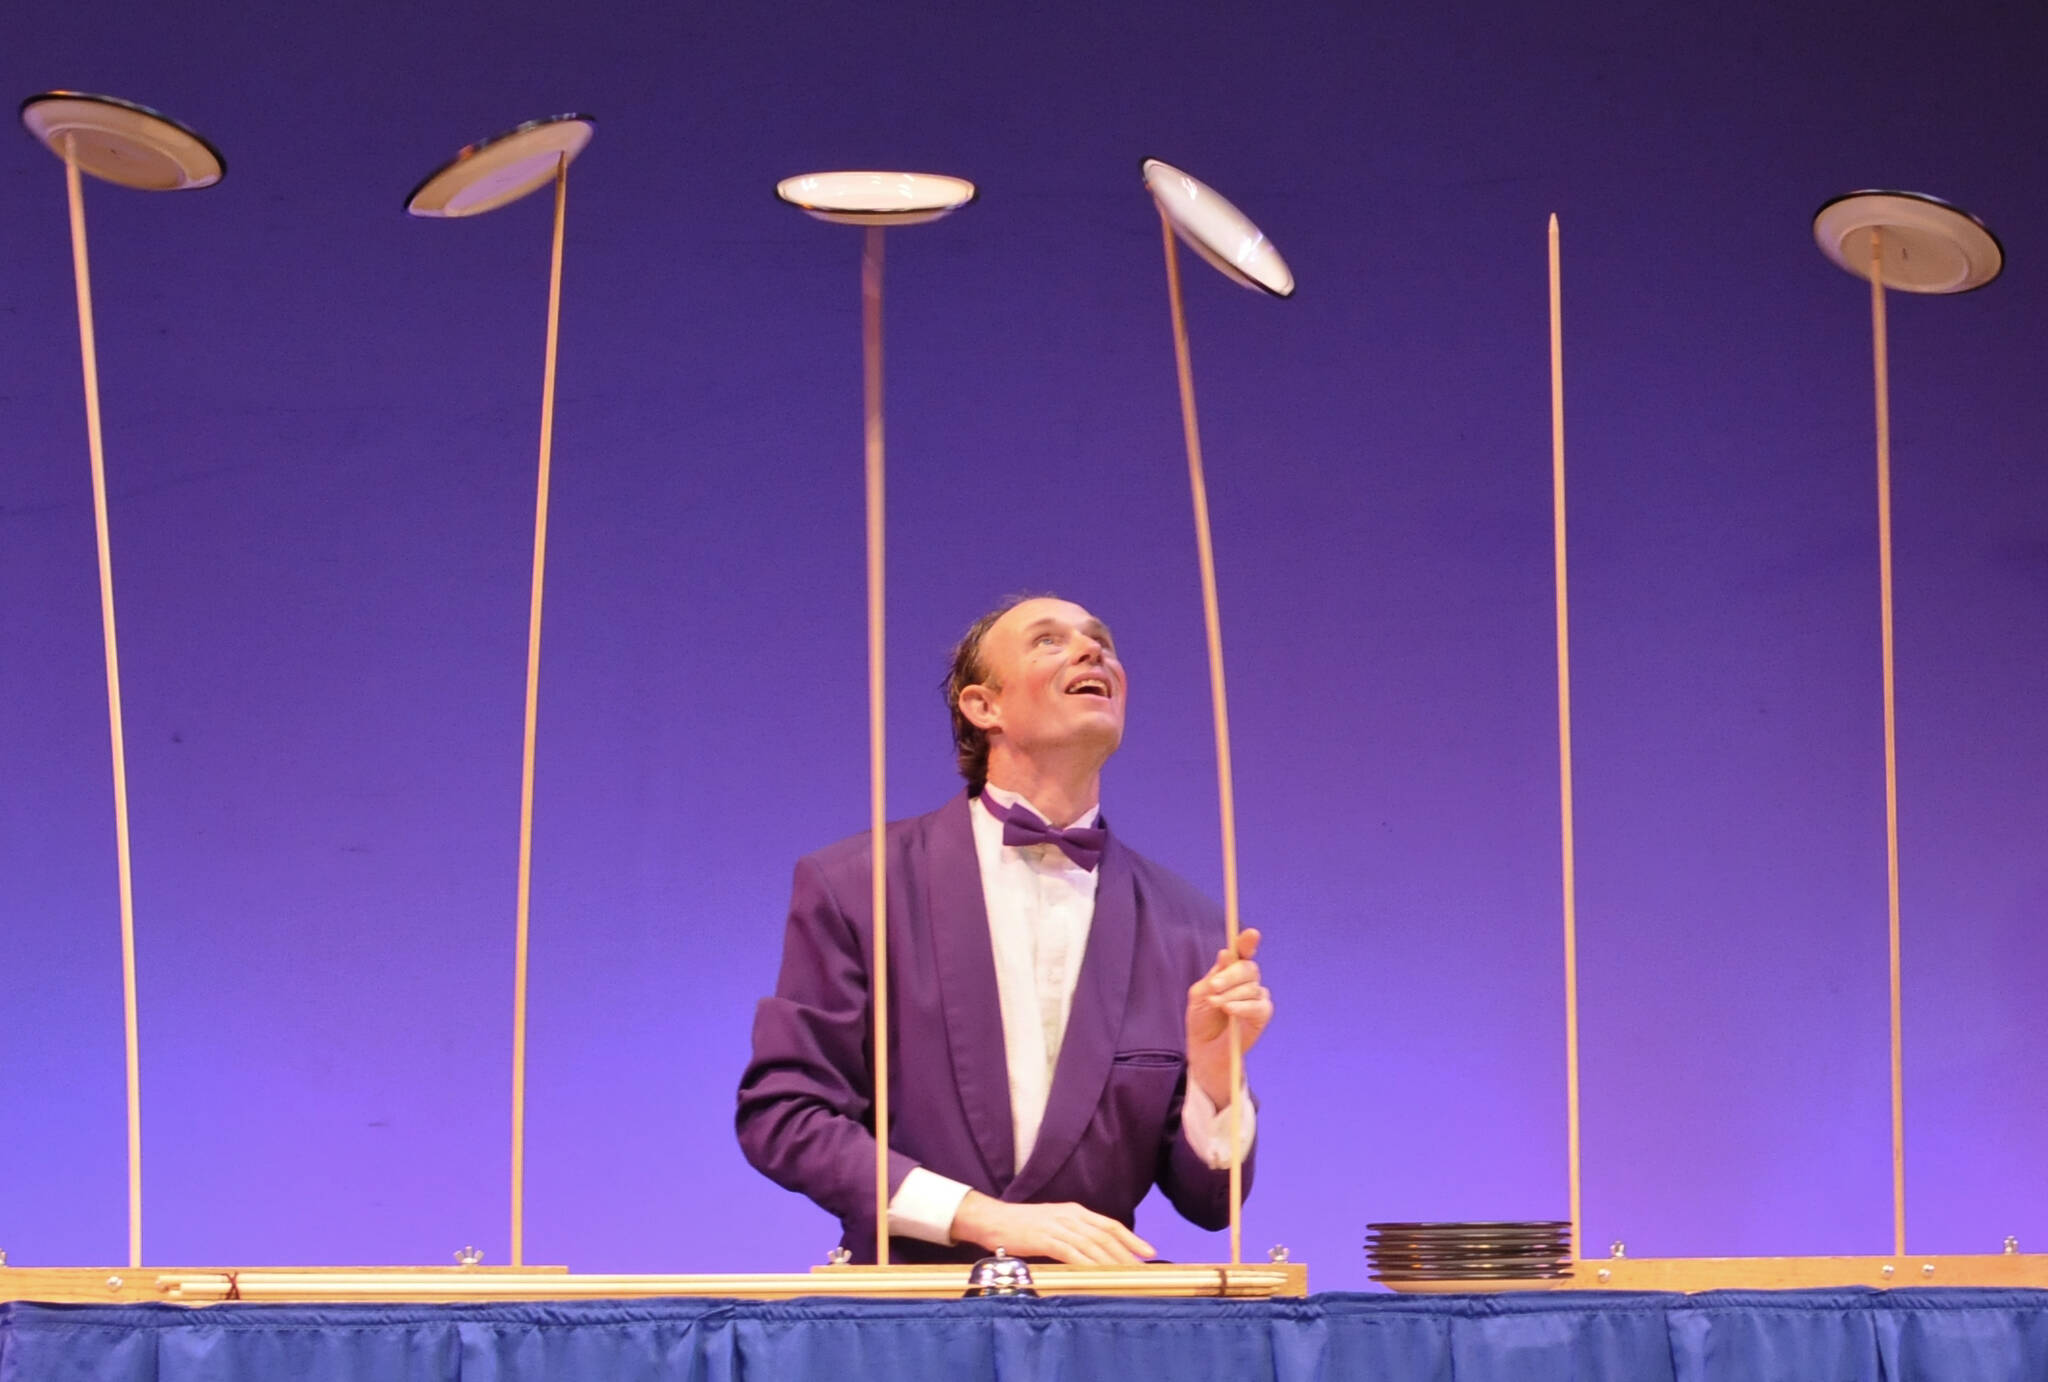 This photo available under a Creative Commons license shows English: Plate spinning by Henrik Bothe. (Michelle Bates / Wikimedia)